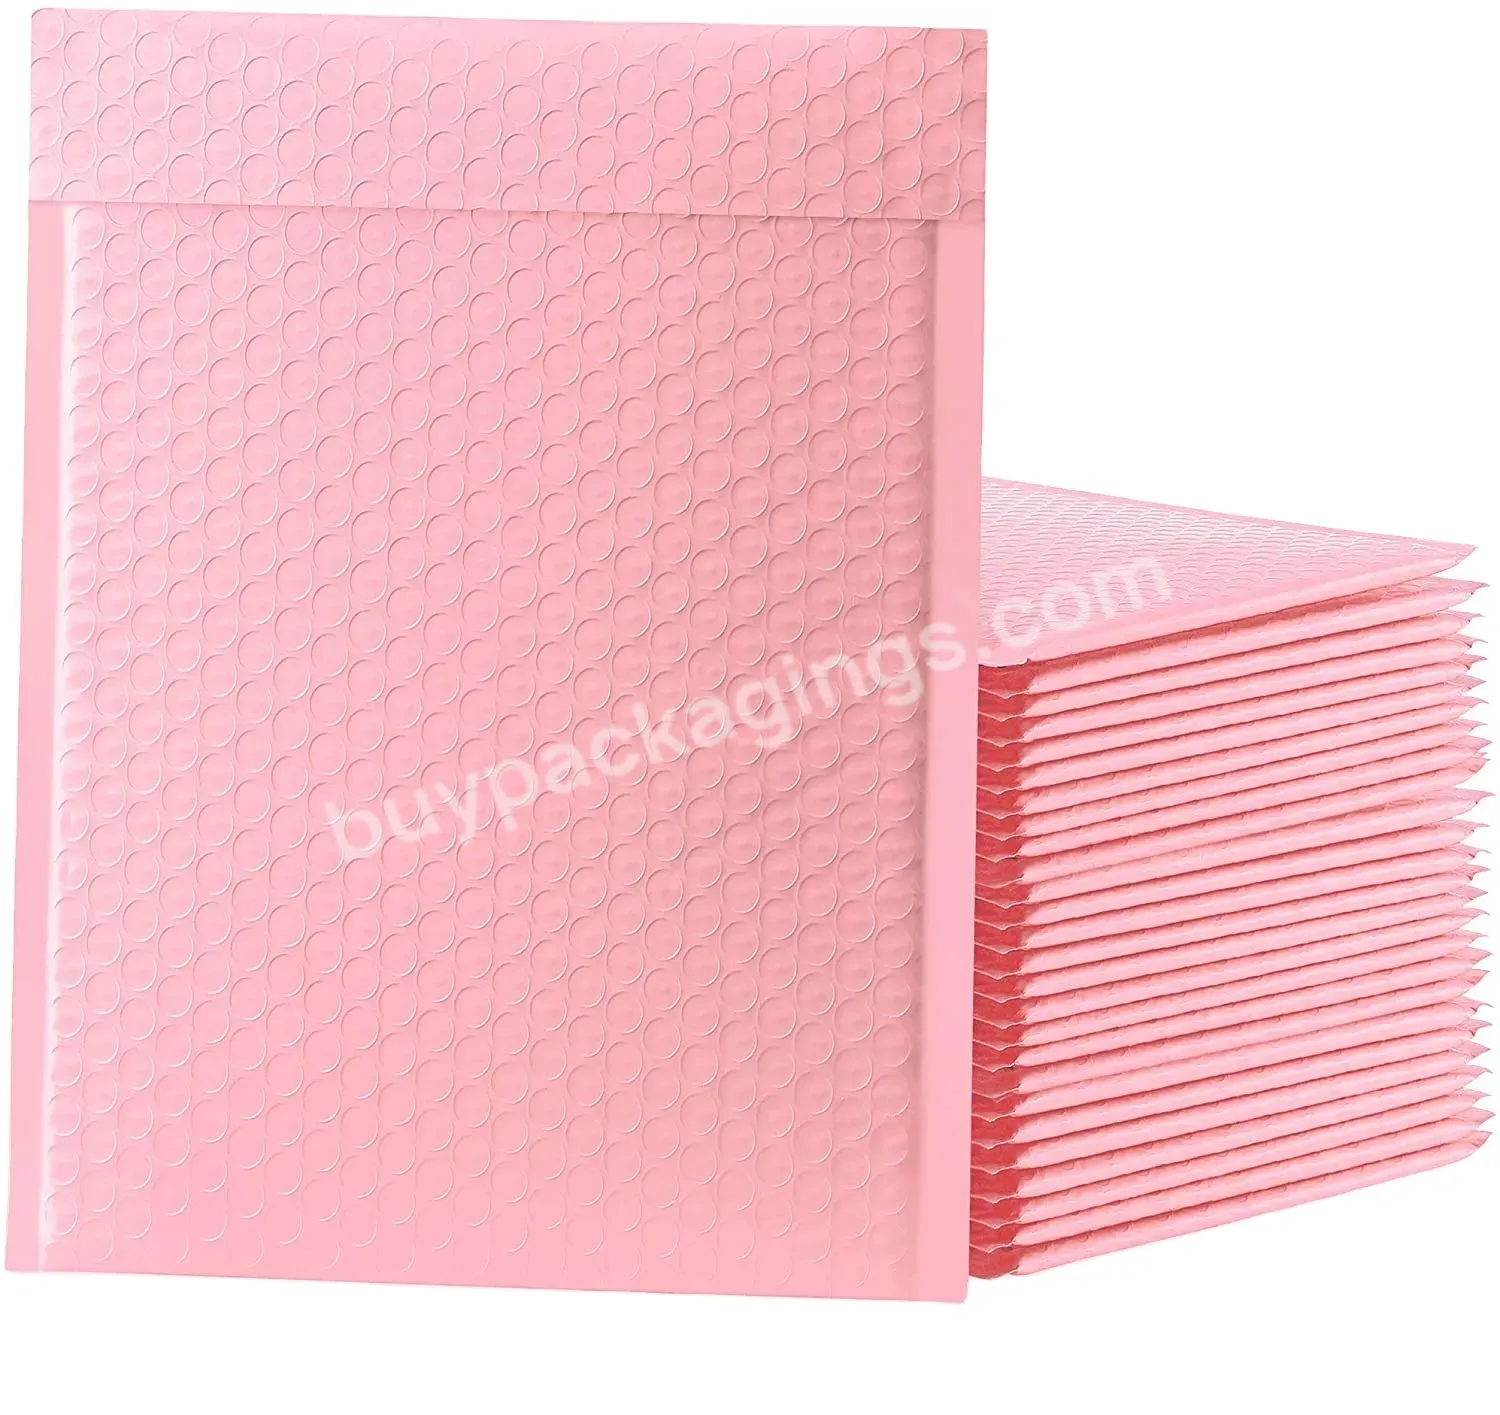 Wholesale Custom Strong Adhesive Shipping Padded Bags Pink Poly Envelope Bubble Mailers Enveloped Eco-friendly Shipping Bags